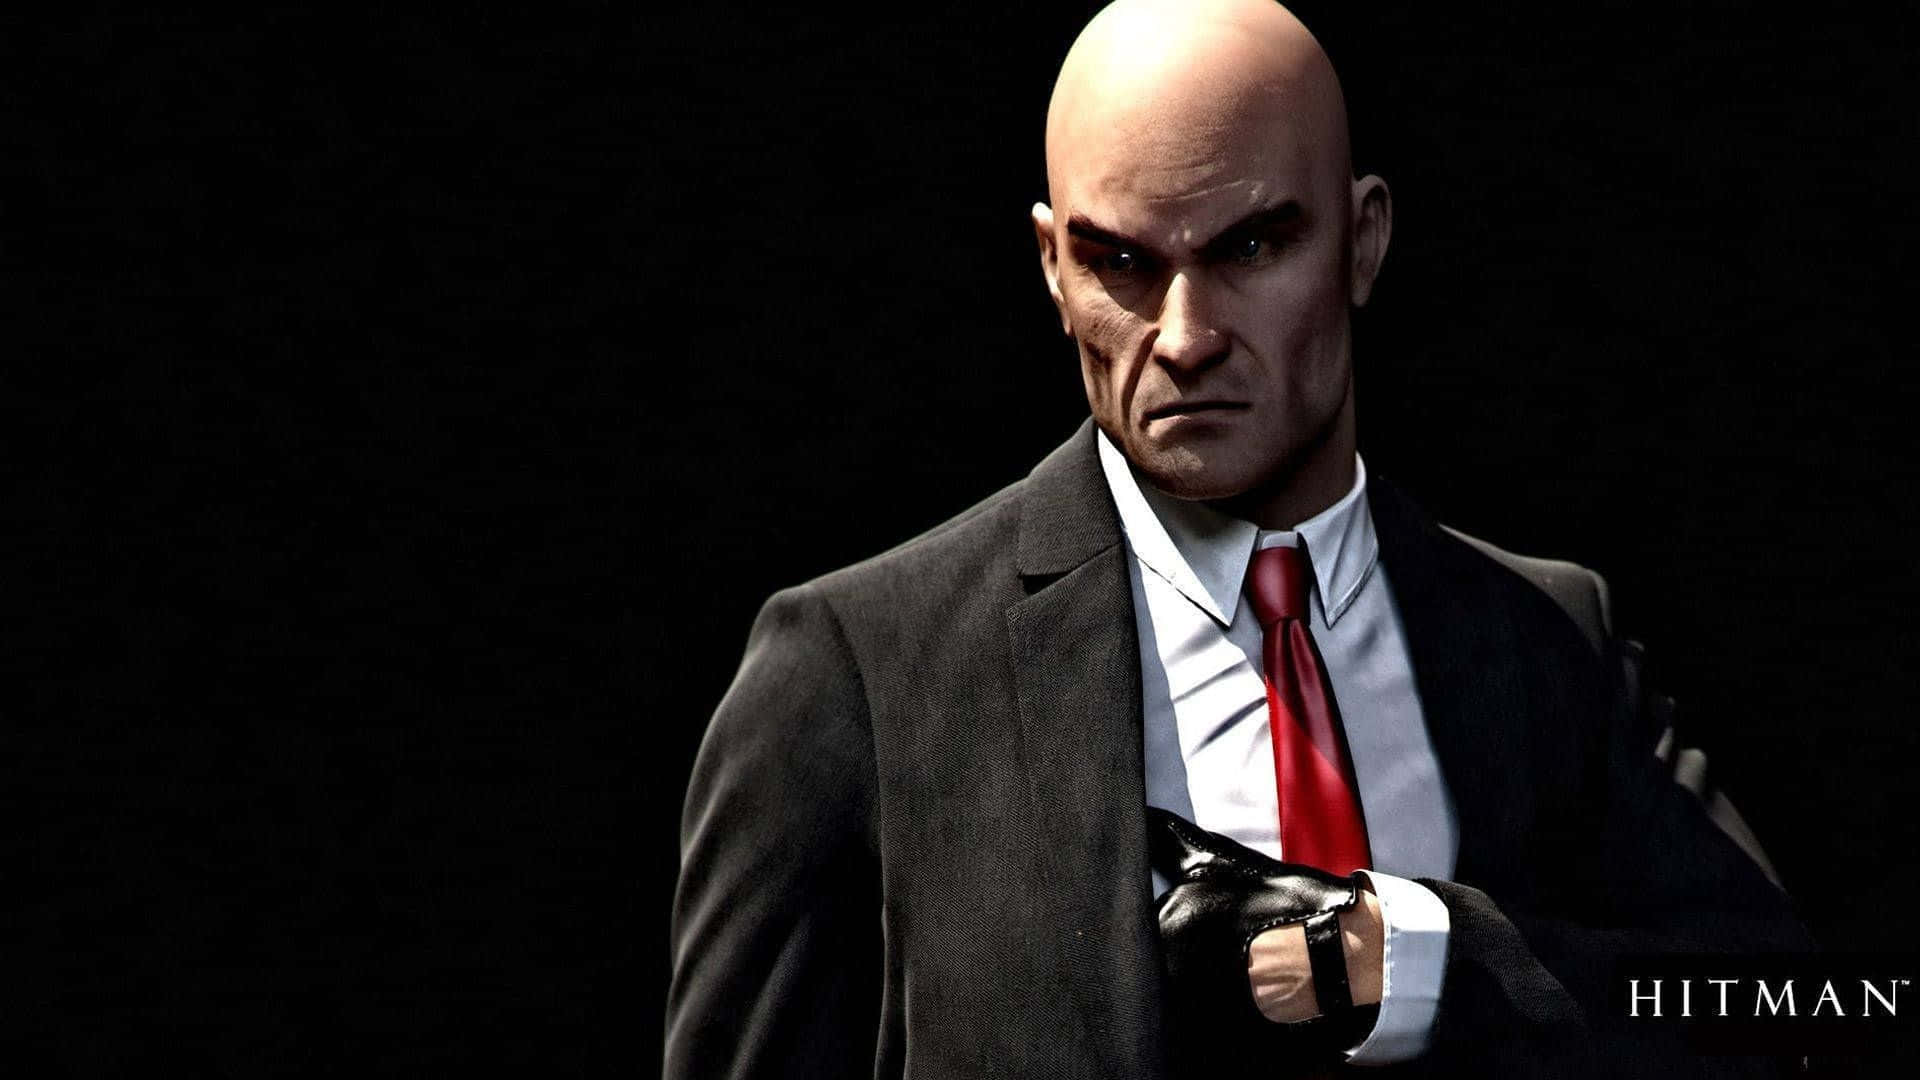 Agent 47, the professional assassin in hitman Absolution